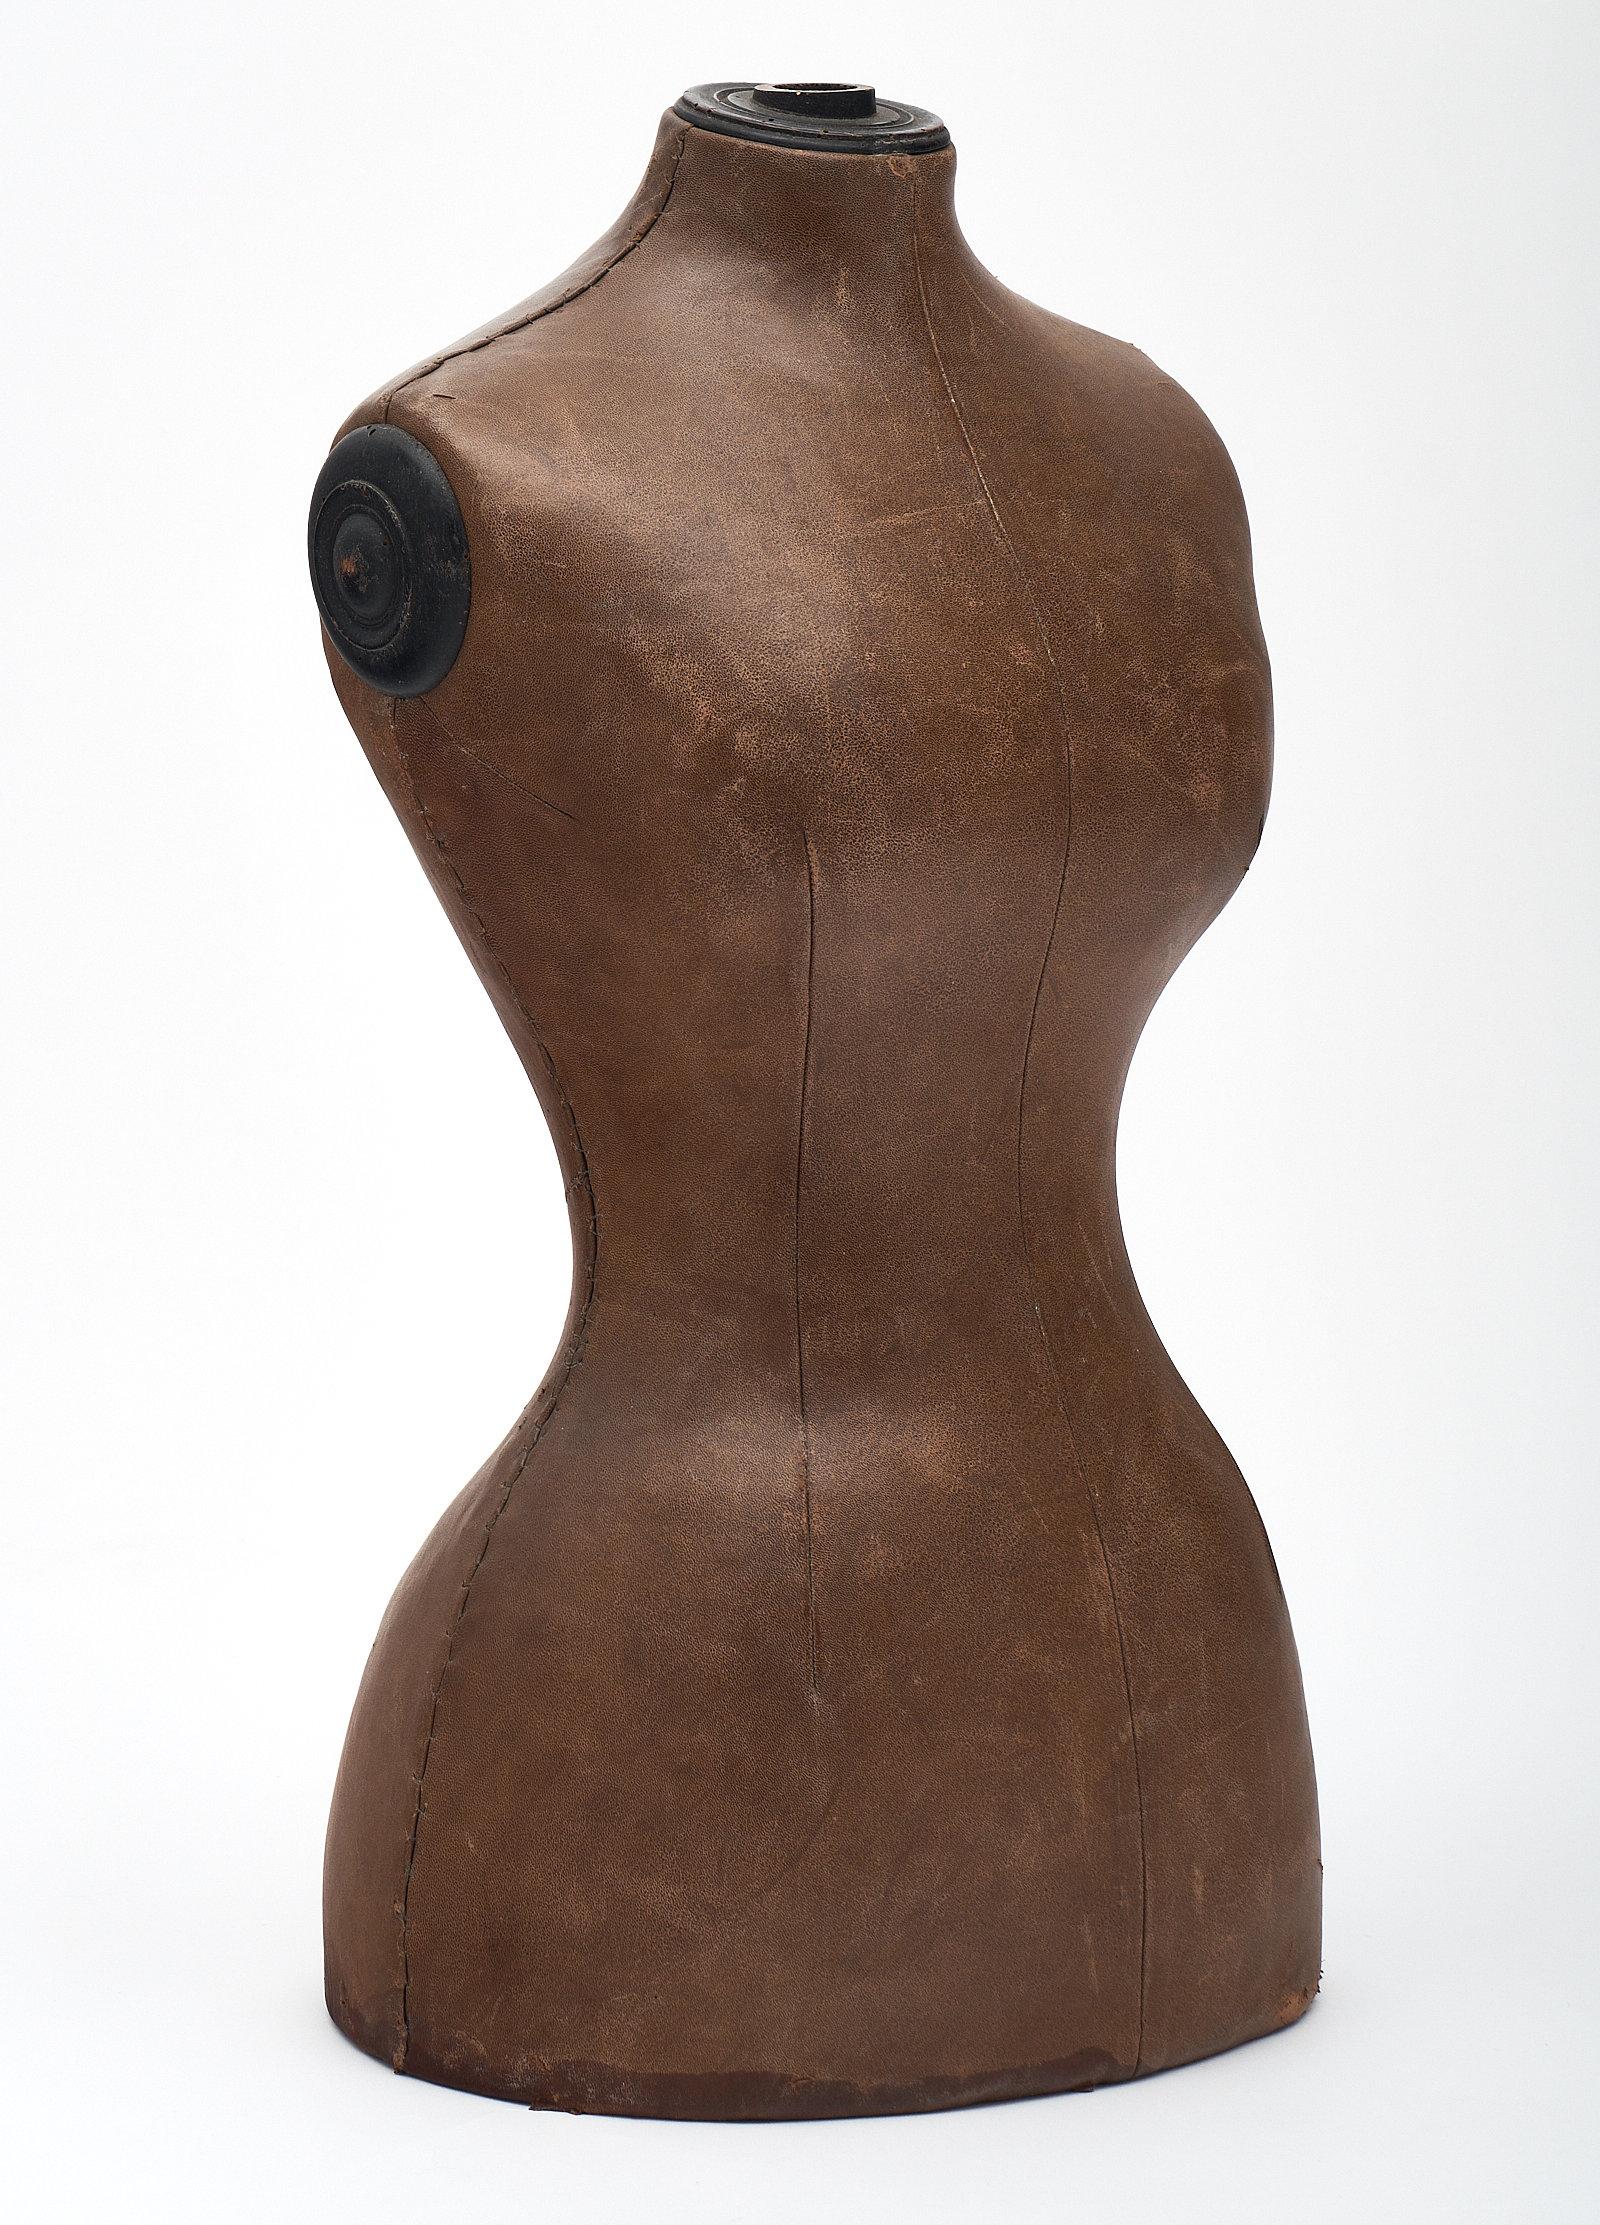 Art Deco period French couture mannequin made of wood and waxed canvas. The curved silhouette is beautiful and feminine, while the patina on the canvas offers a slightly masculine balance.